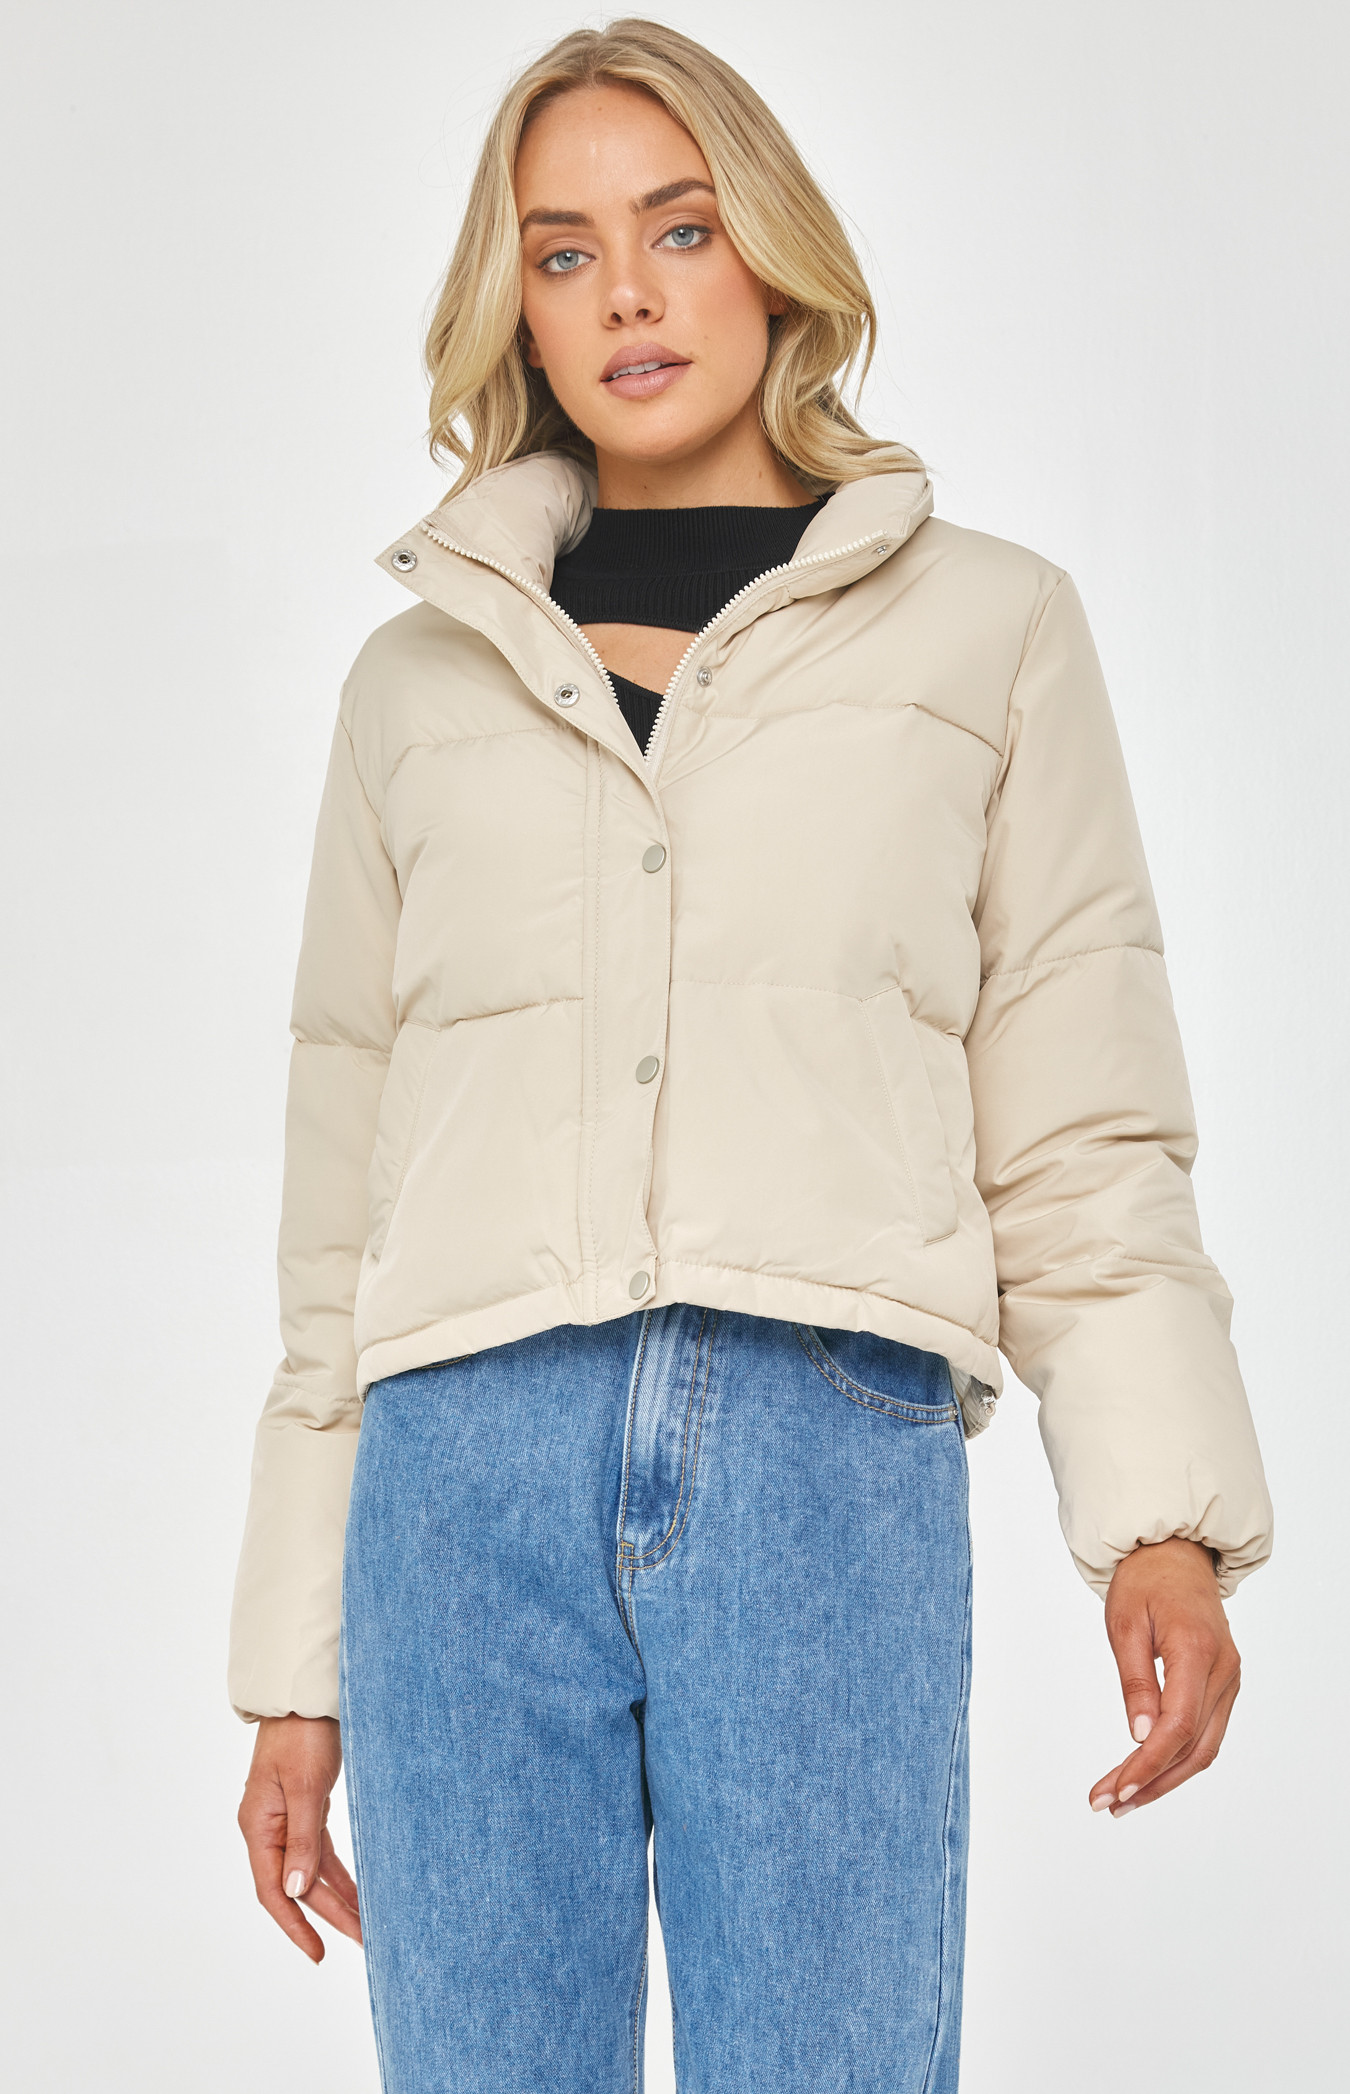 Puffer Jacket with Zip and Front Button Details (SJT359A)